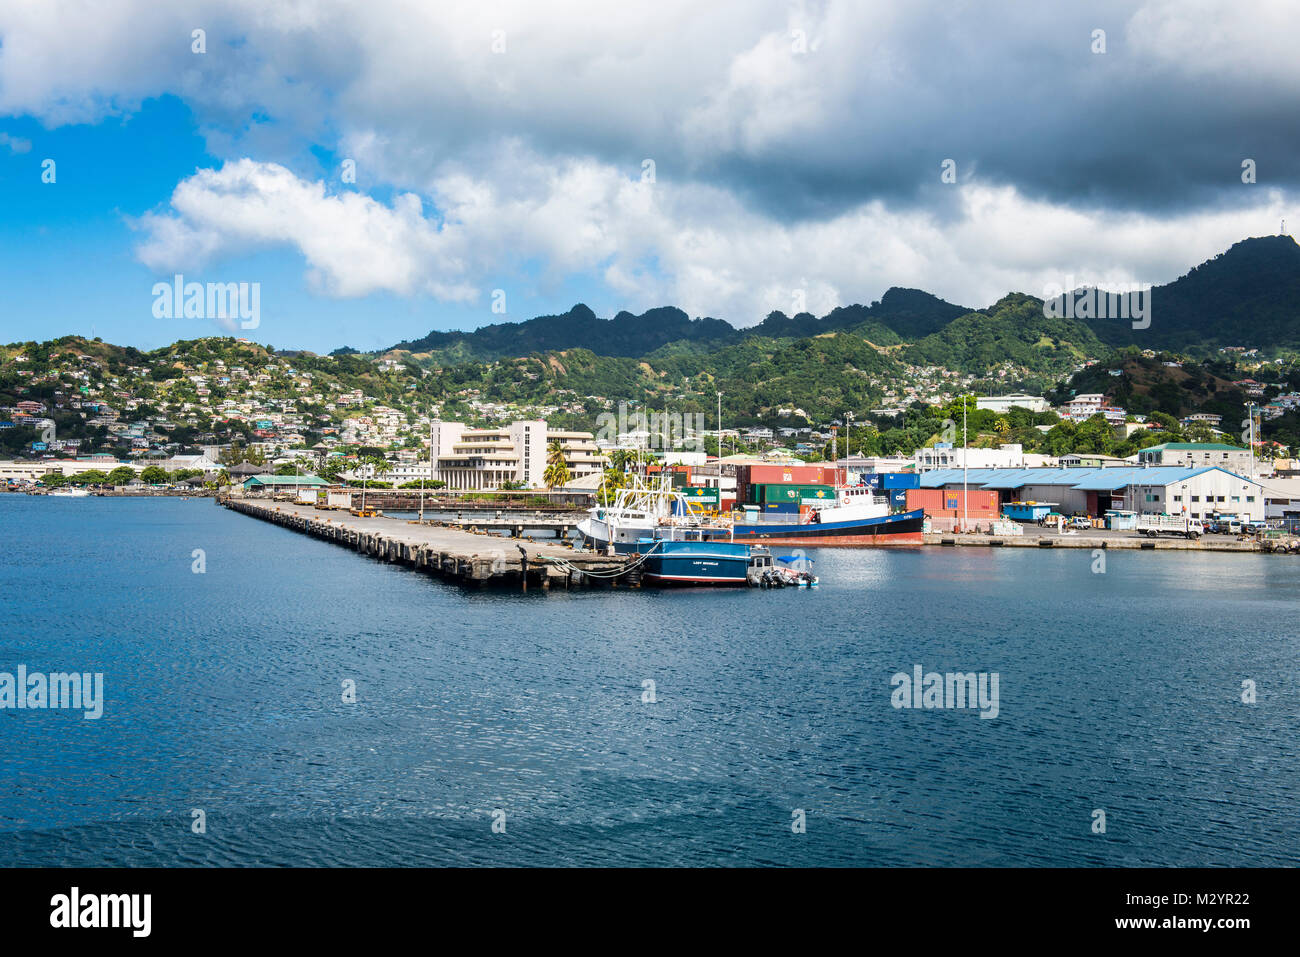 The harbour of Kingstown, St.Vincent, St. Vincent and the Grenadines, Caribbean Stock Photo